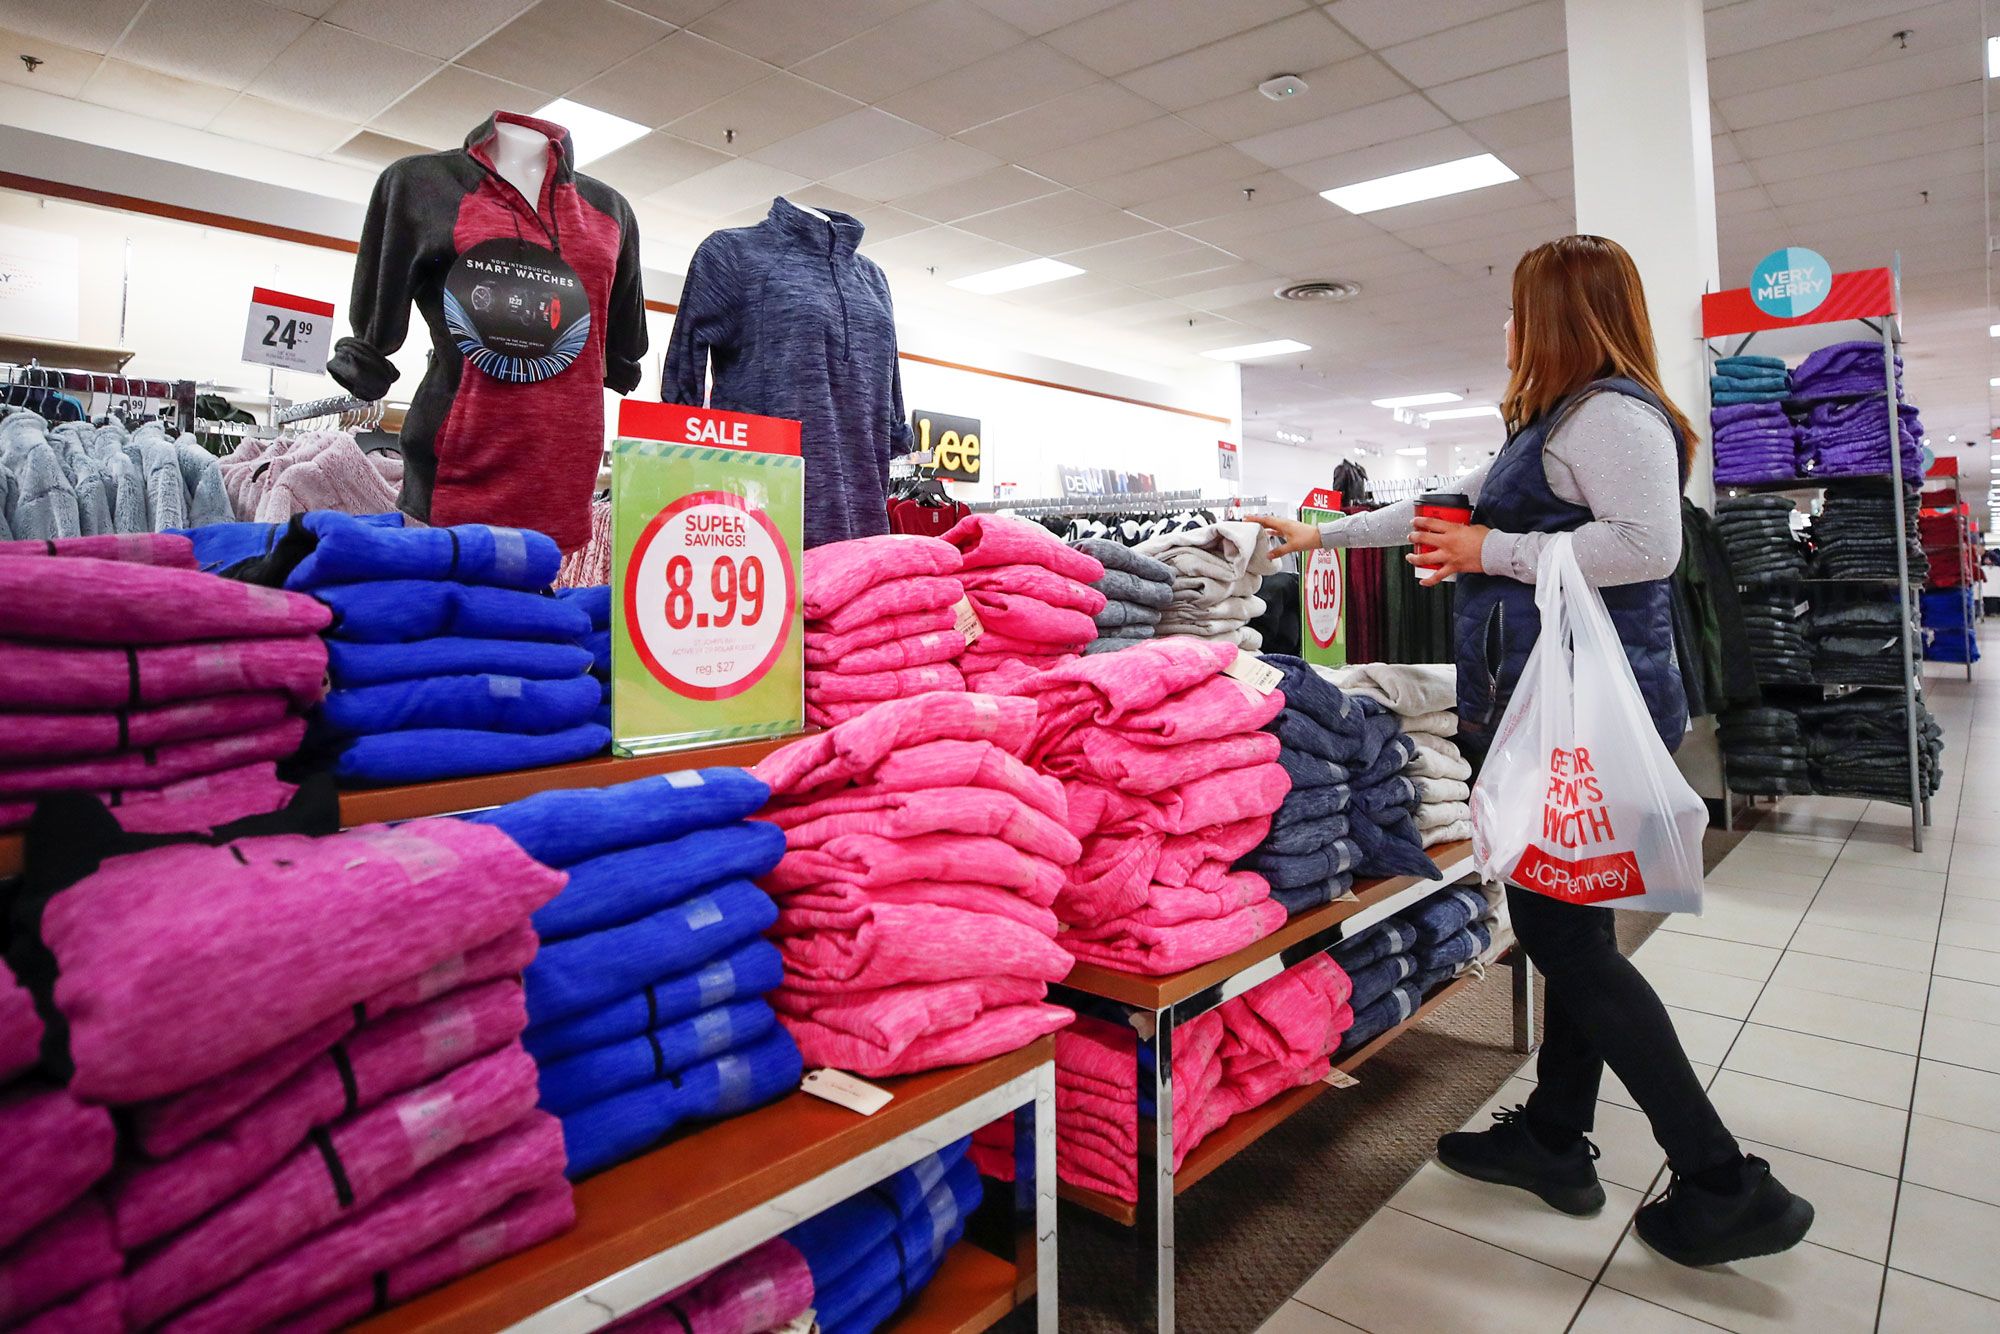 Department stores need reinvention, not touch-ups